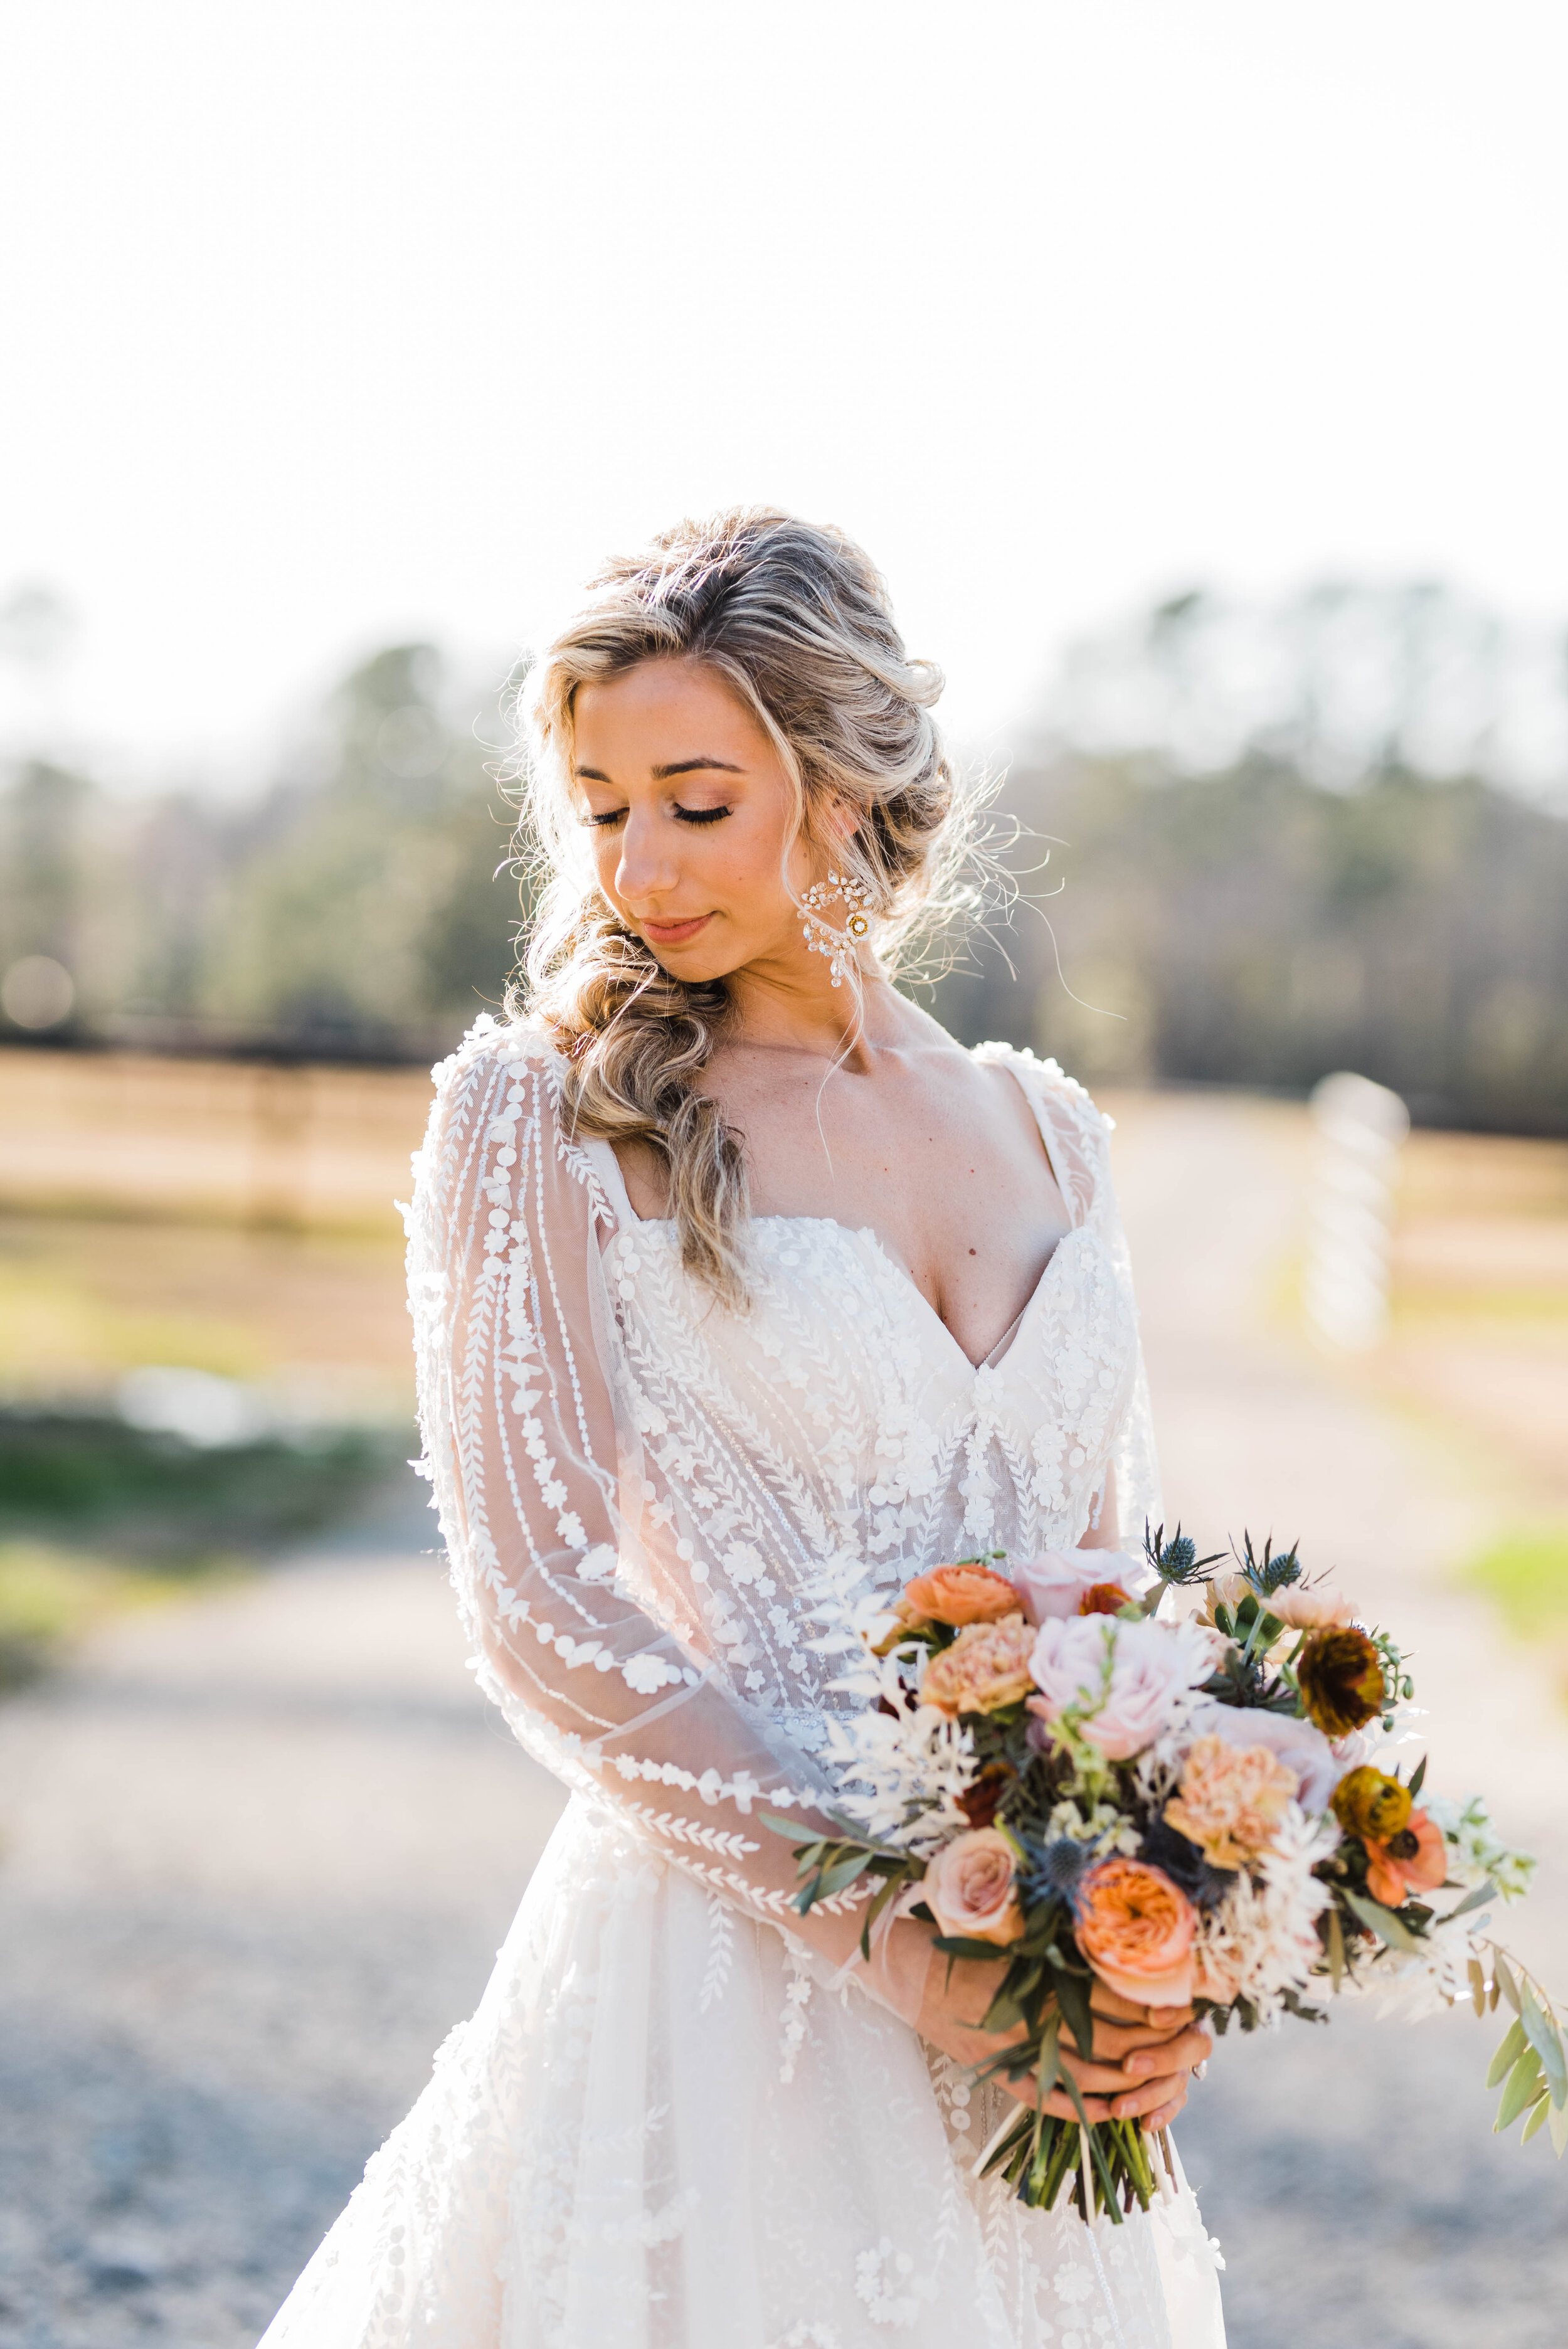 Wilmington Wedding Inspiration | Ivy and Linen Design Co.